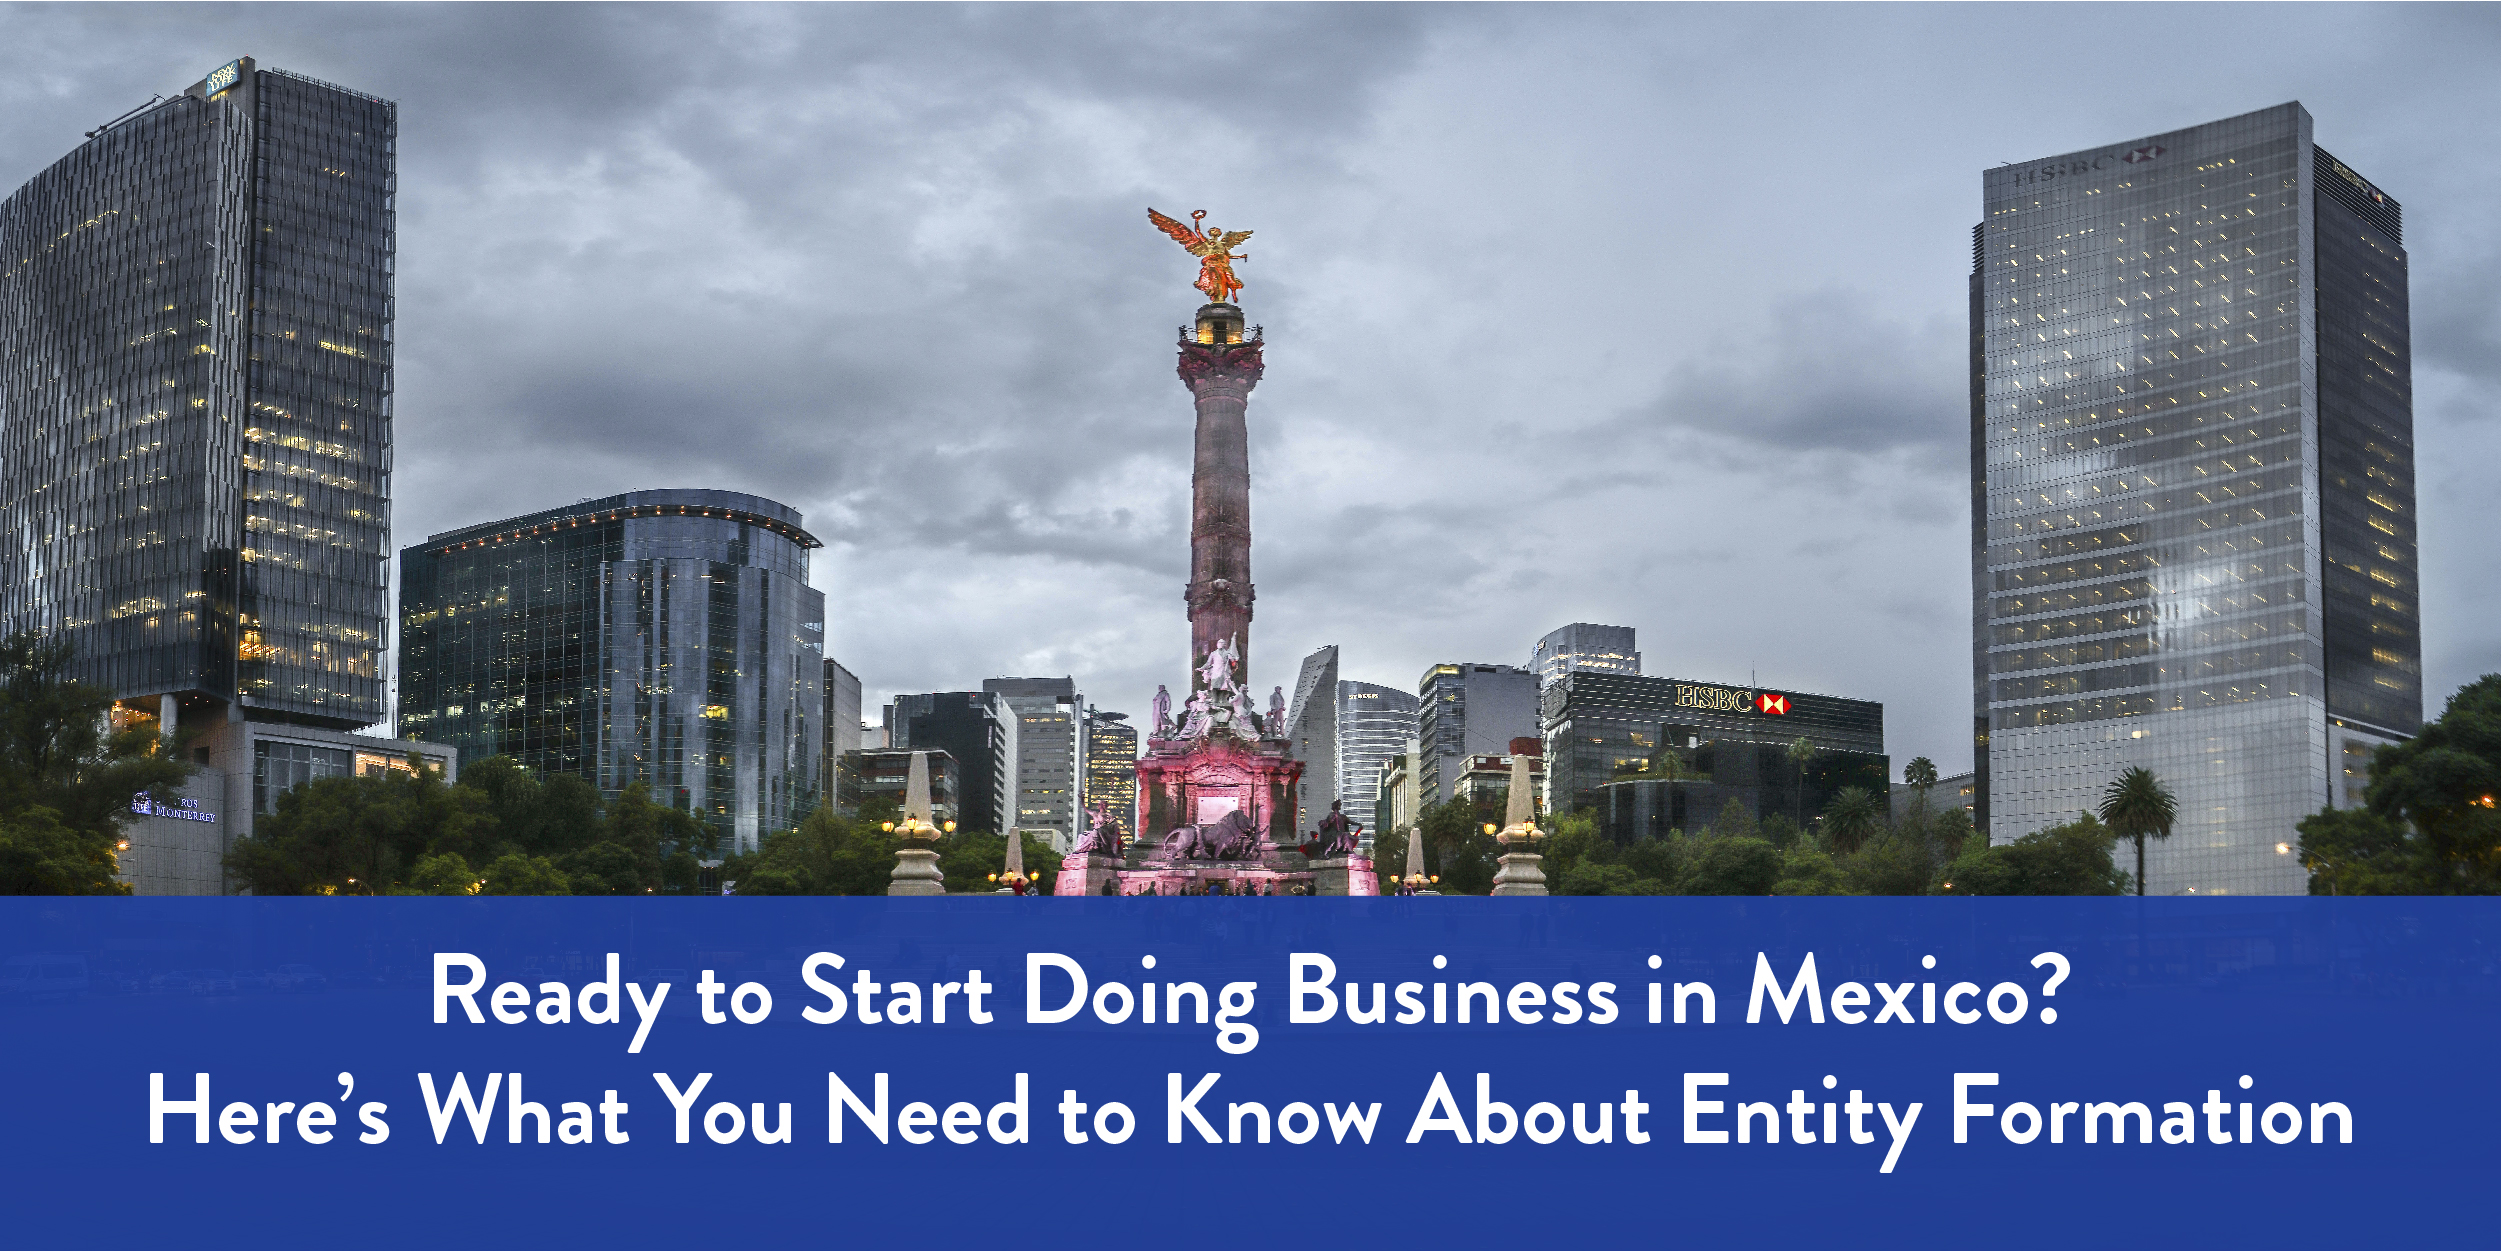 Ready to Start Doing Business in Mexico? Here’s What You Need to Know About Entity Formation